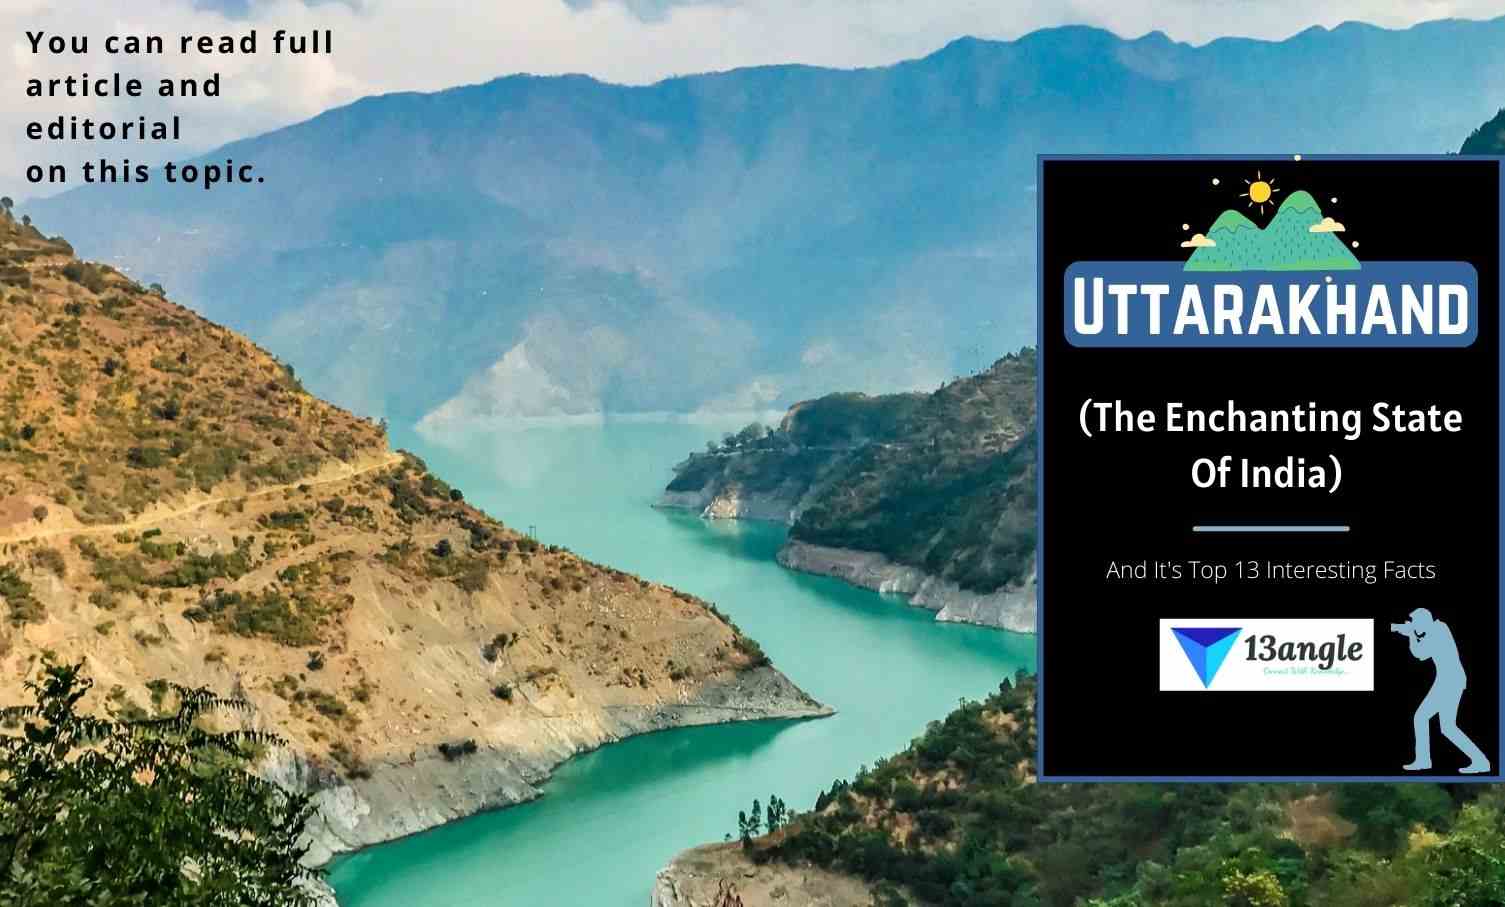 Uttarakhand (The Enchanting State Of India) And It's Top 13 Interesting Facts- 13angle.com